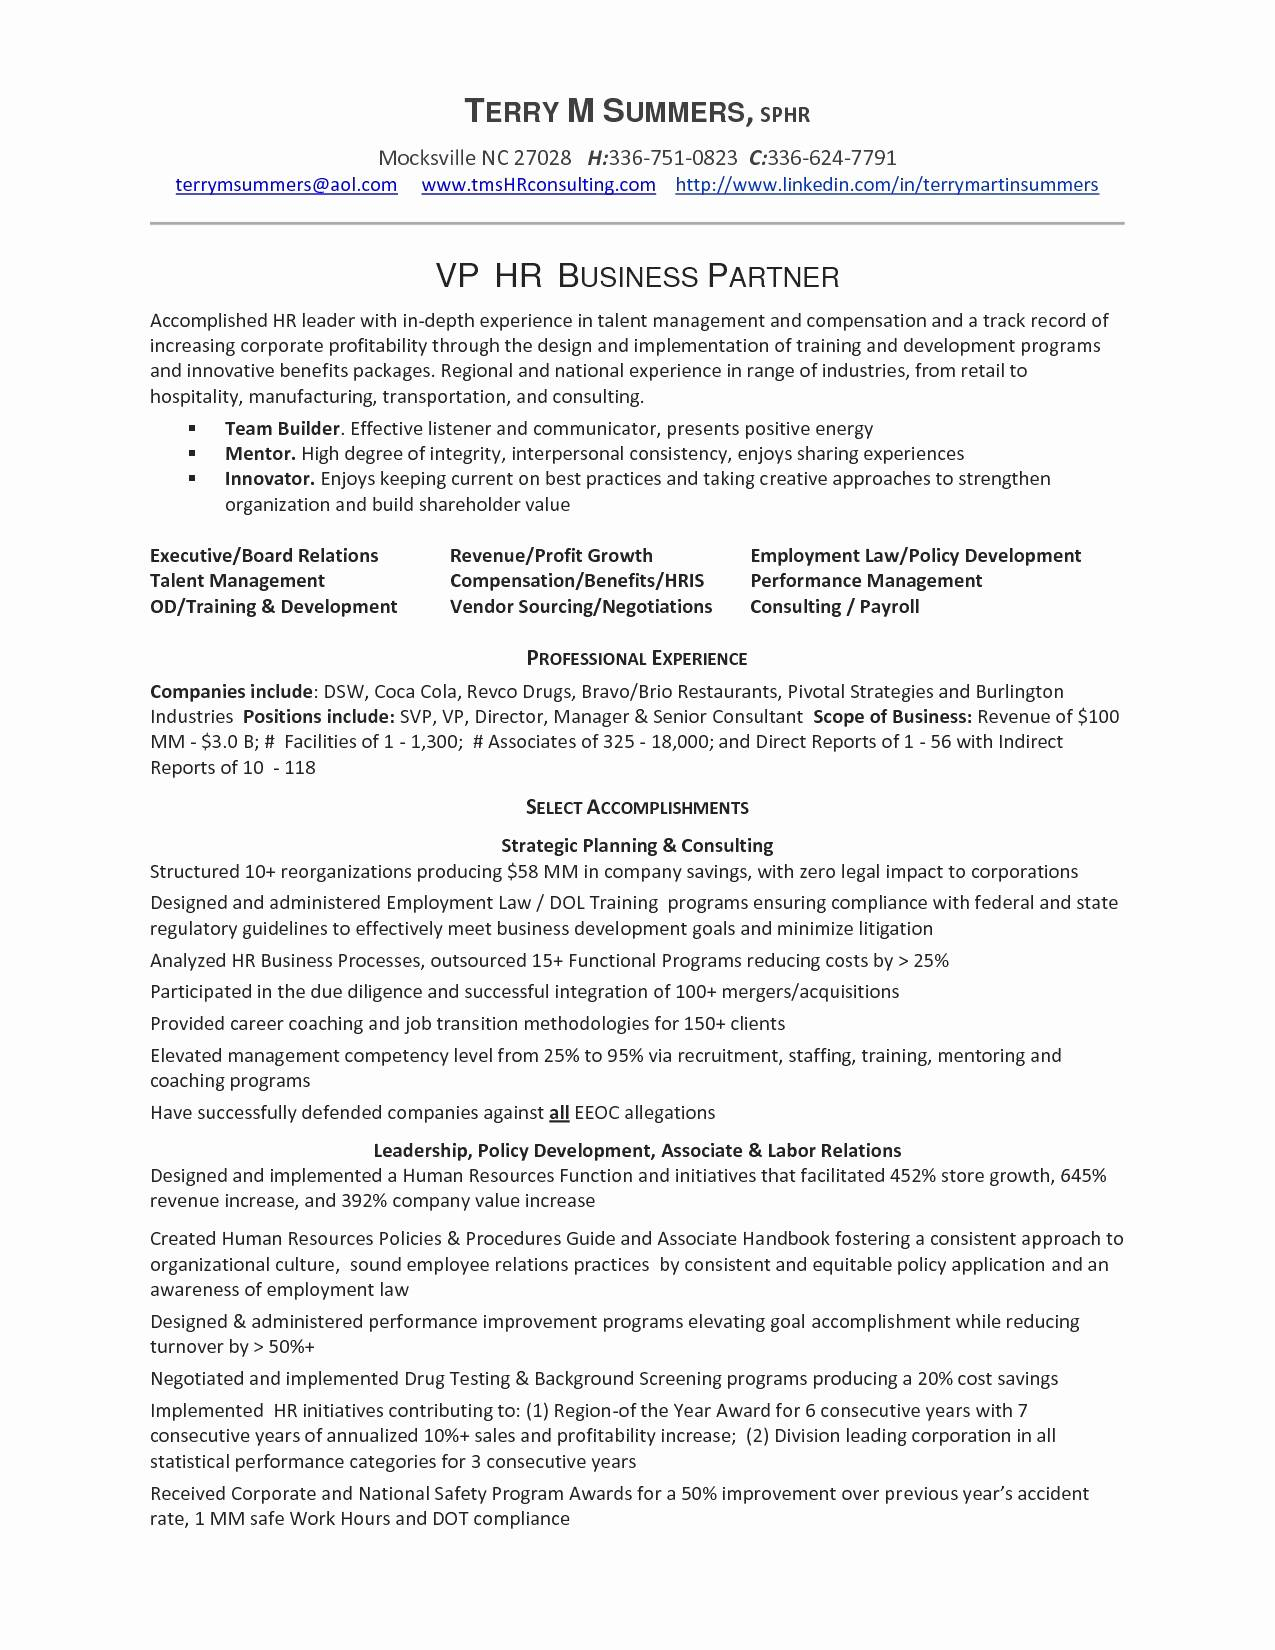 Writing A Business Letter Template - Legal Advice Disclaimer Template Best Resume and Cover Letter